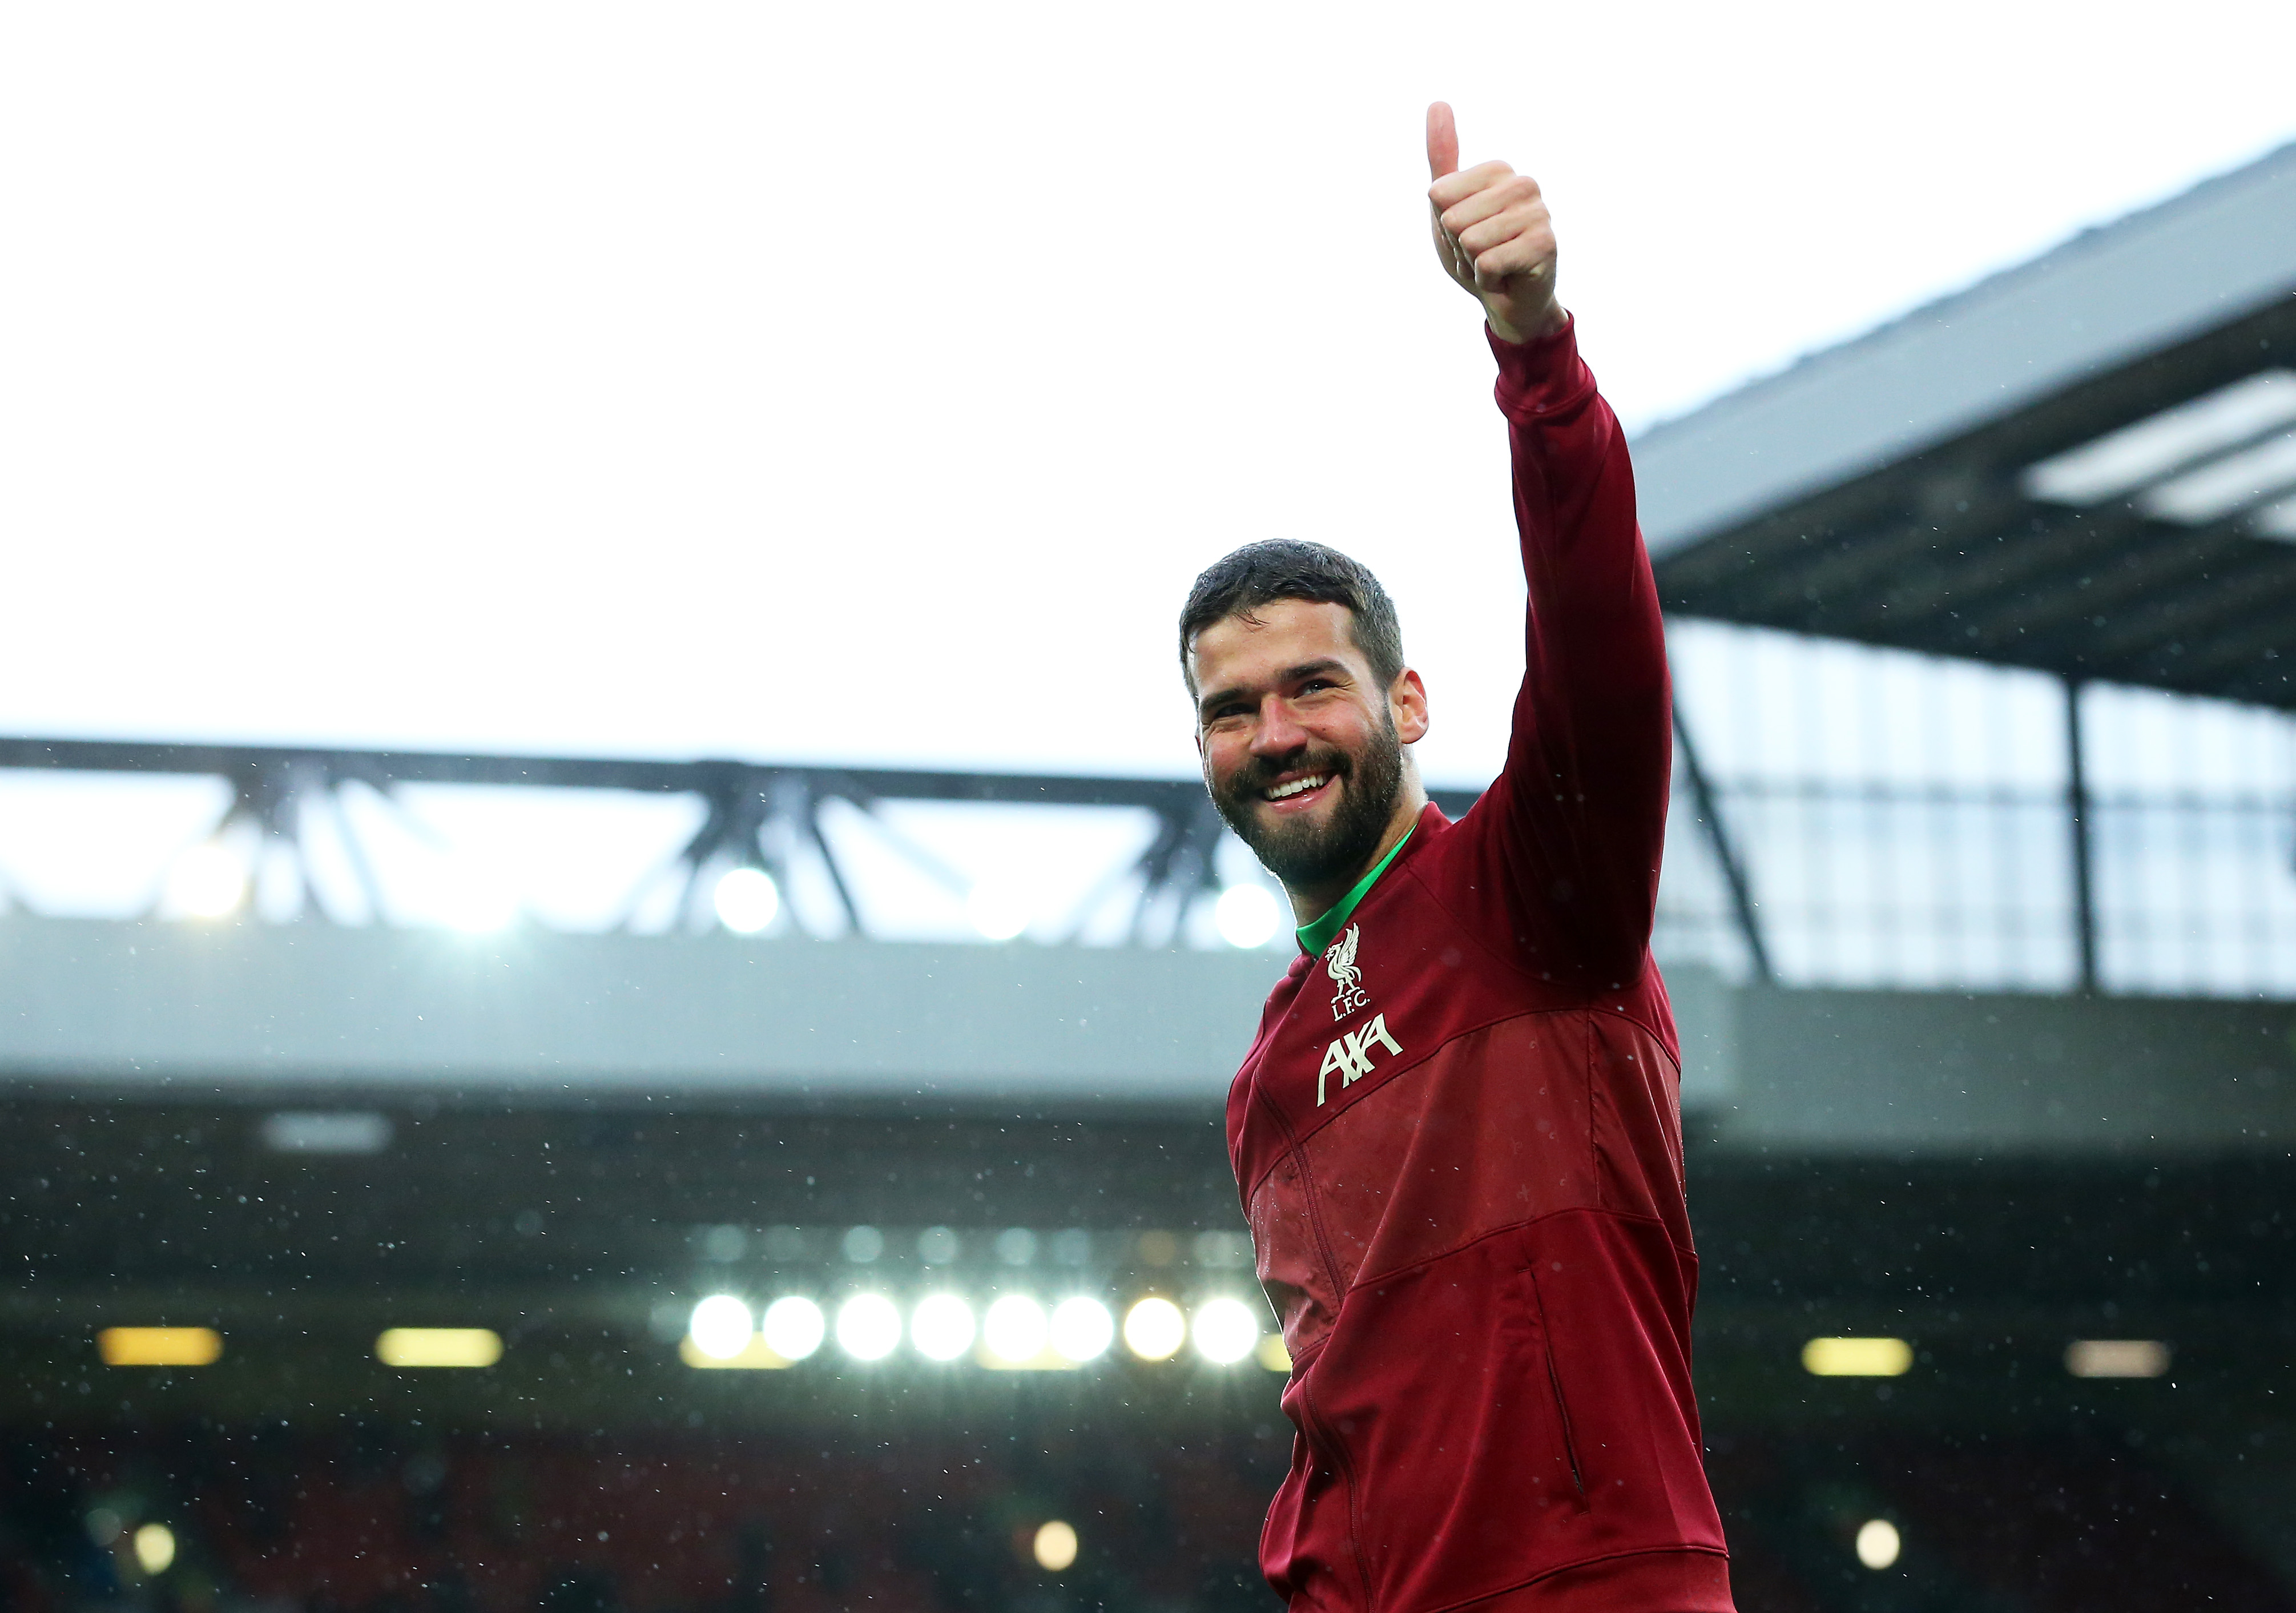 ‘Football without fans is not football’ – Alisson Becker praises Anfield’s 12th man